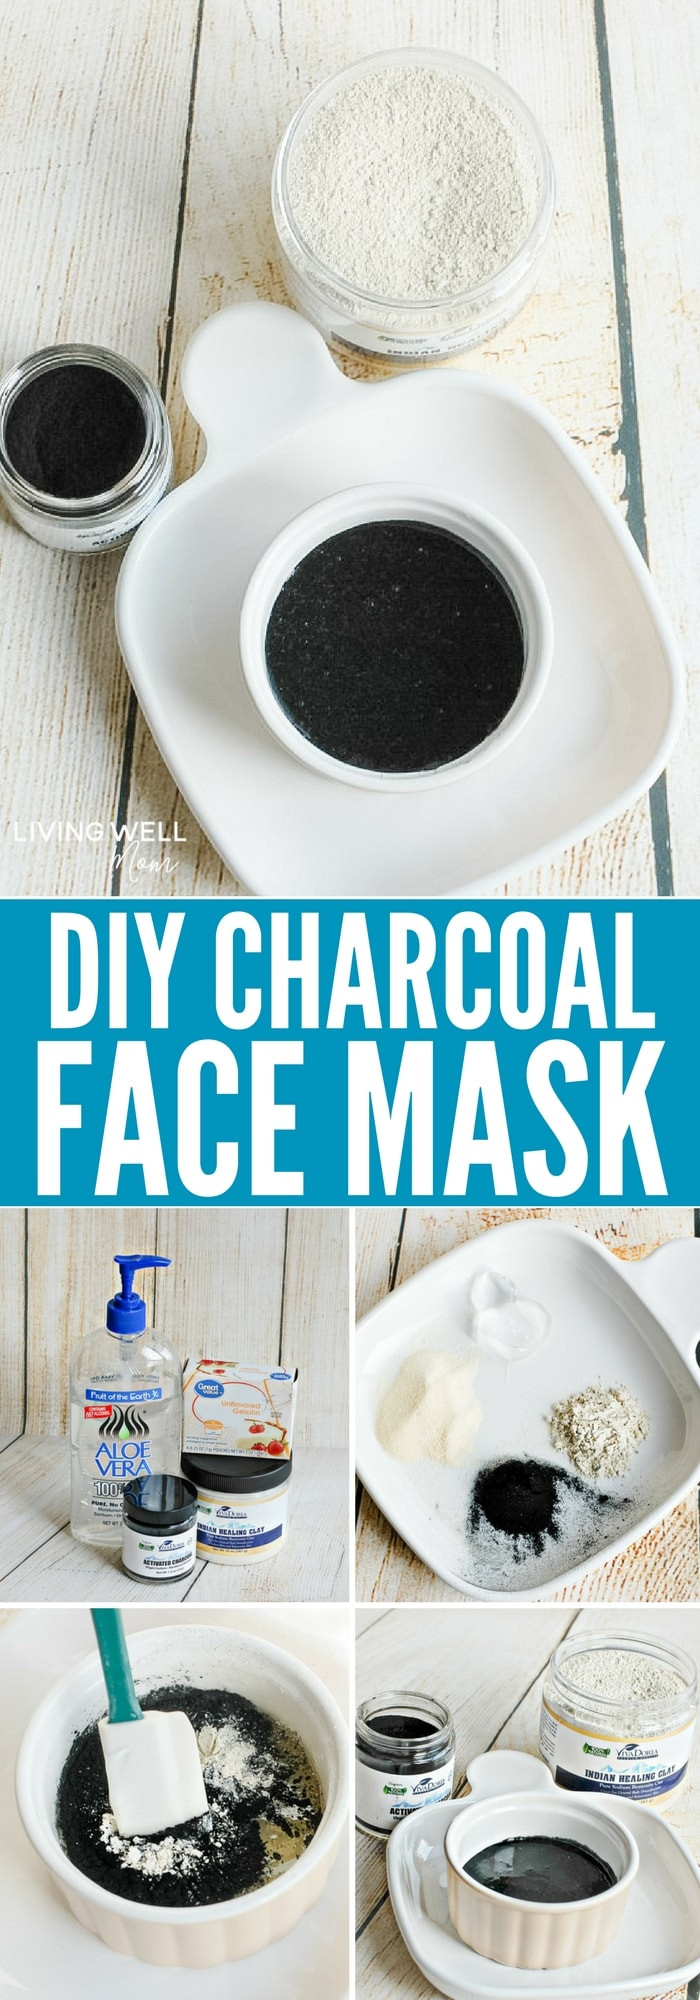 DIY Charcoal Mask Recipe
 DIY Charcoal Face Mask Recipe Living Well Mom